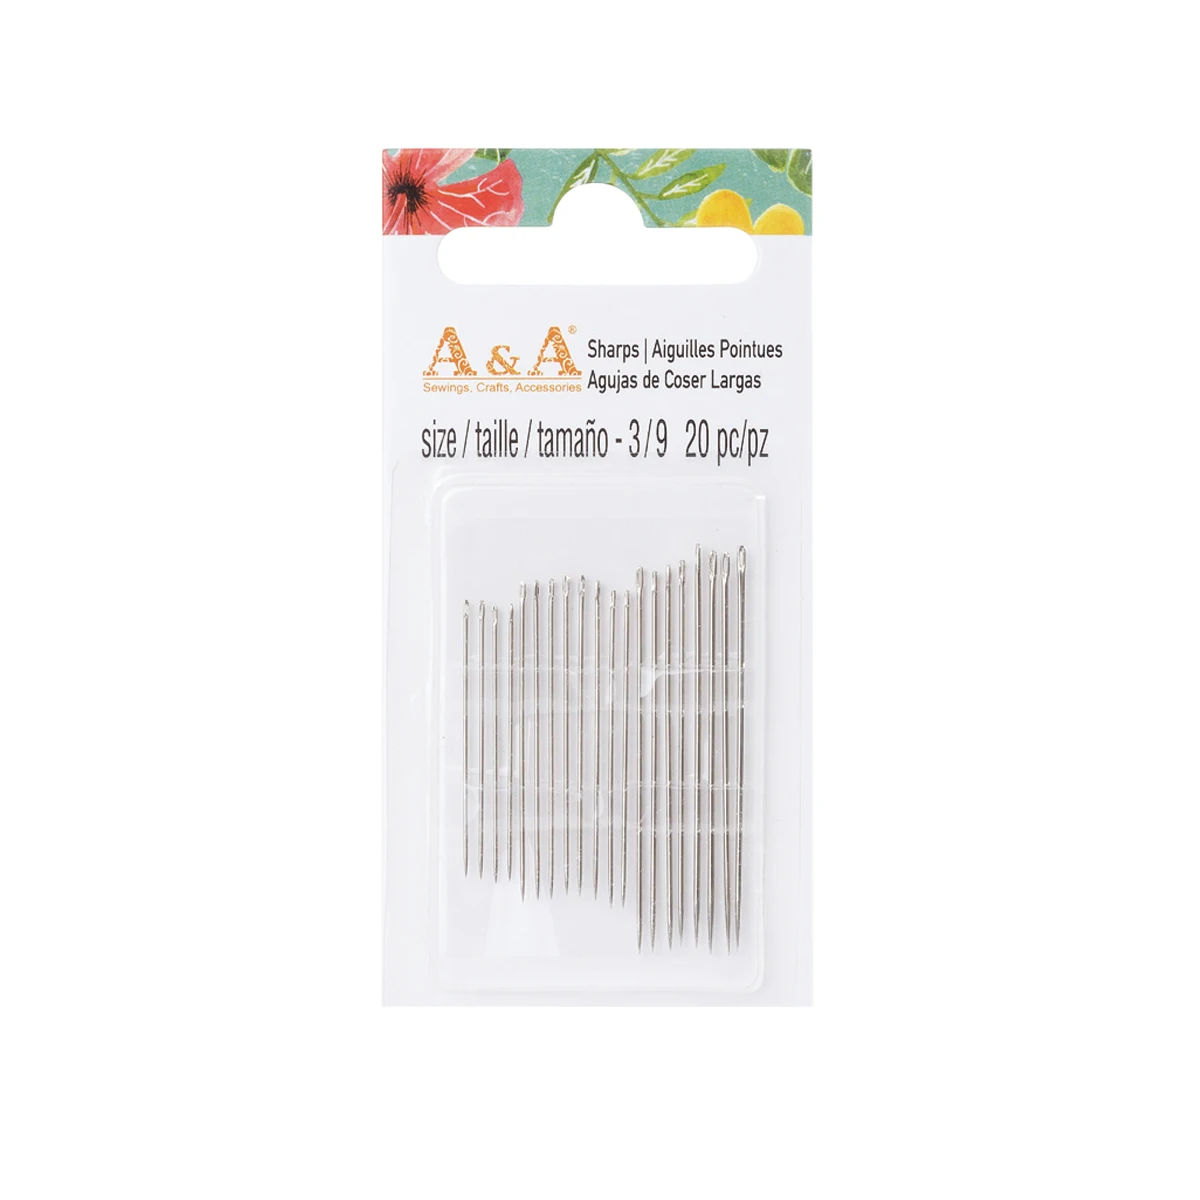 
High quality 25 pcs house hand sewing needles,golden eye sewing needle kit  (1600219734545)